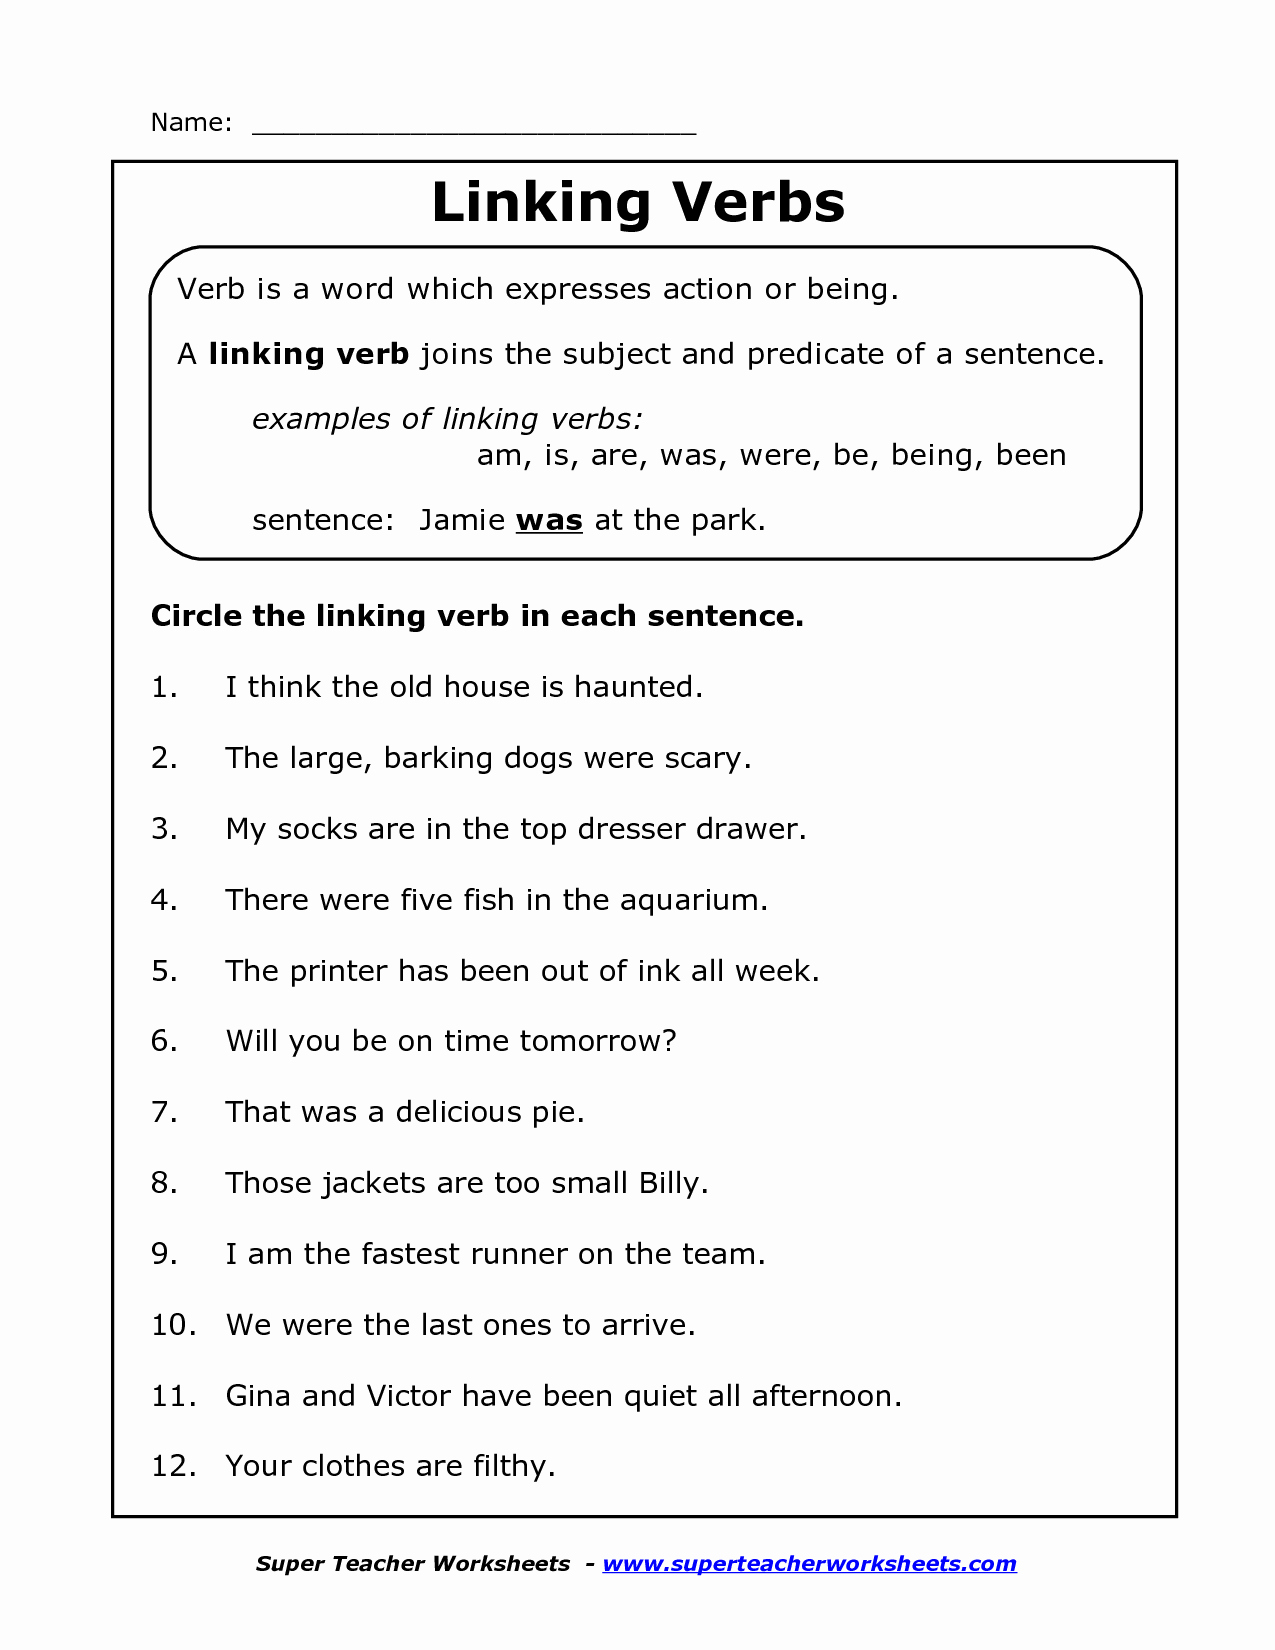 50 Linking And Helping Verbs Worksheet